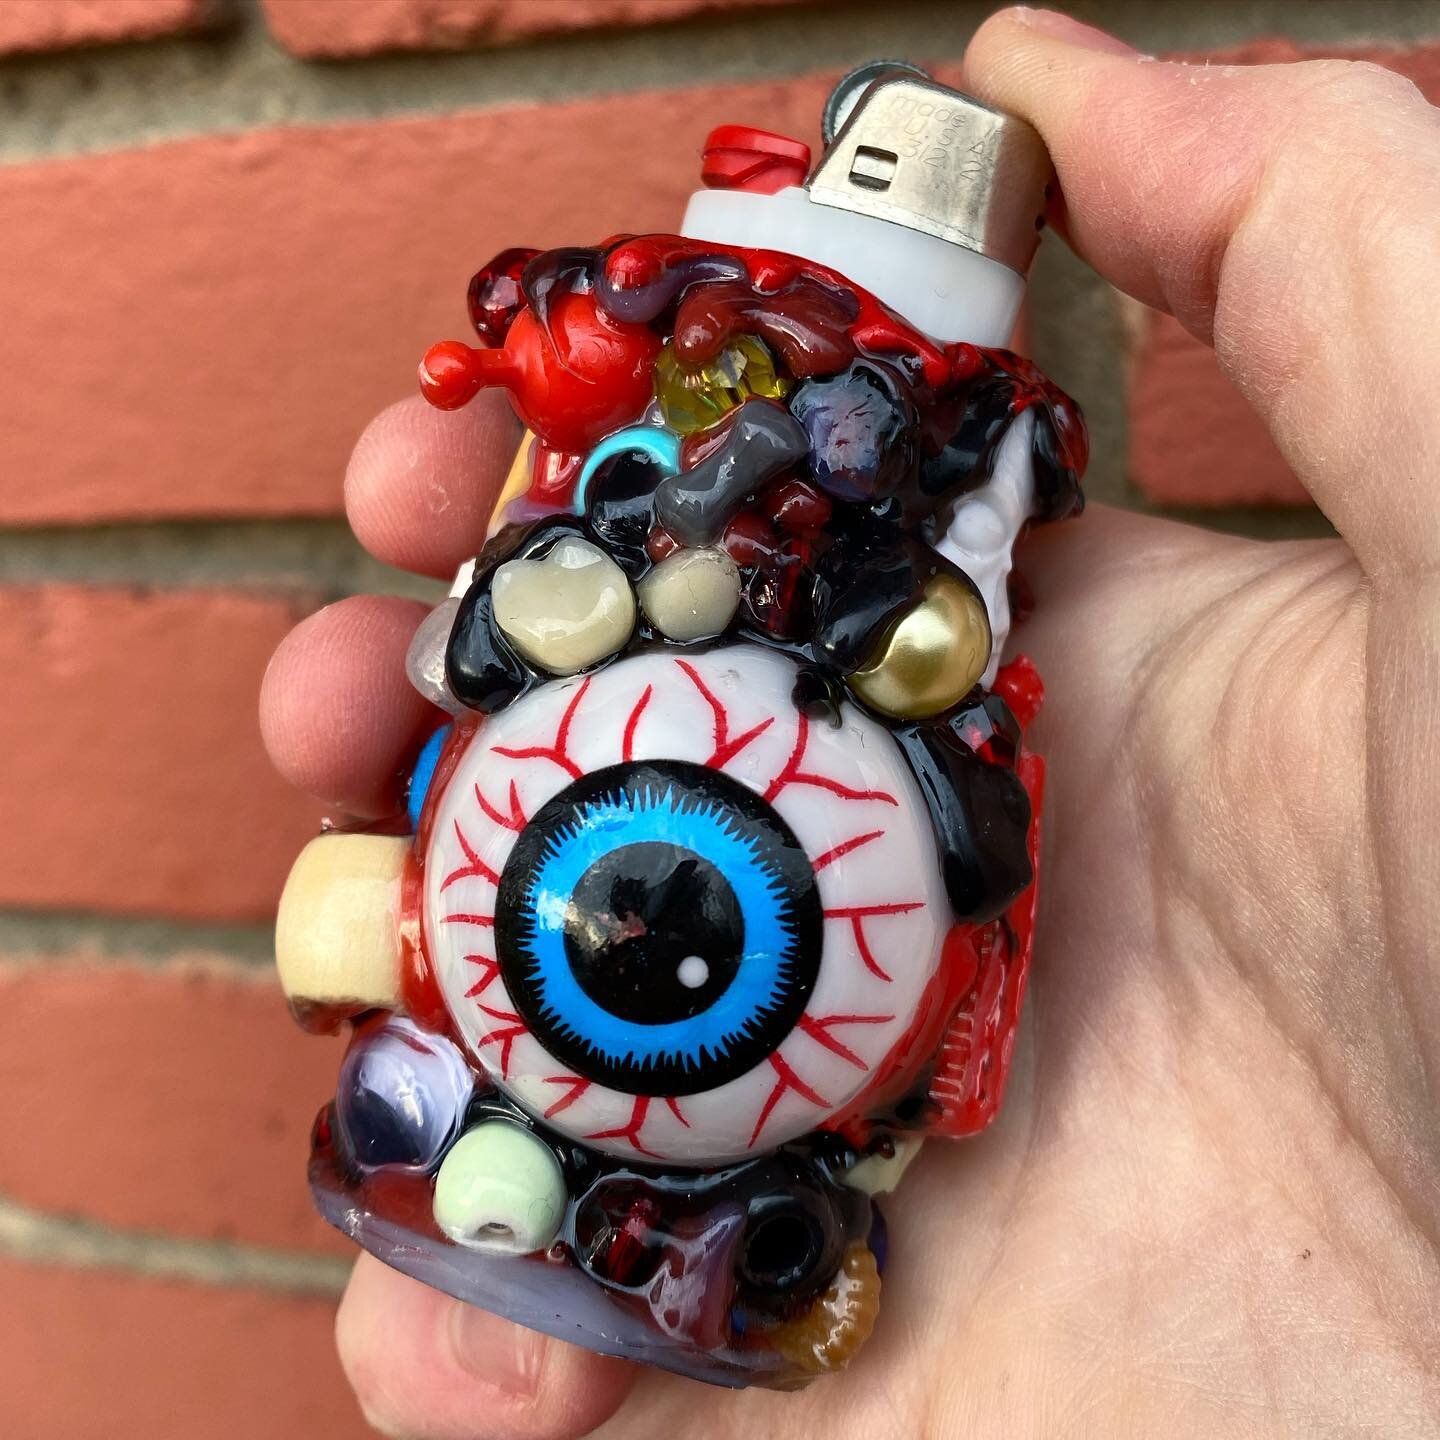 👁️ EYEBOL 🔥 available now, this ooey gooey one of a kind lighter case featuring spooky teefs and skele bones 😮 on sale now for only 25 human earth doll hairs! link in bio to scoop 🔥 iamrisik.com/beadlejuice-products